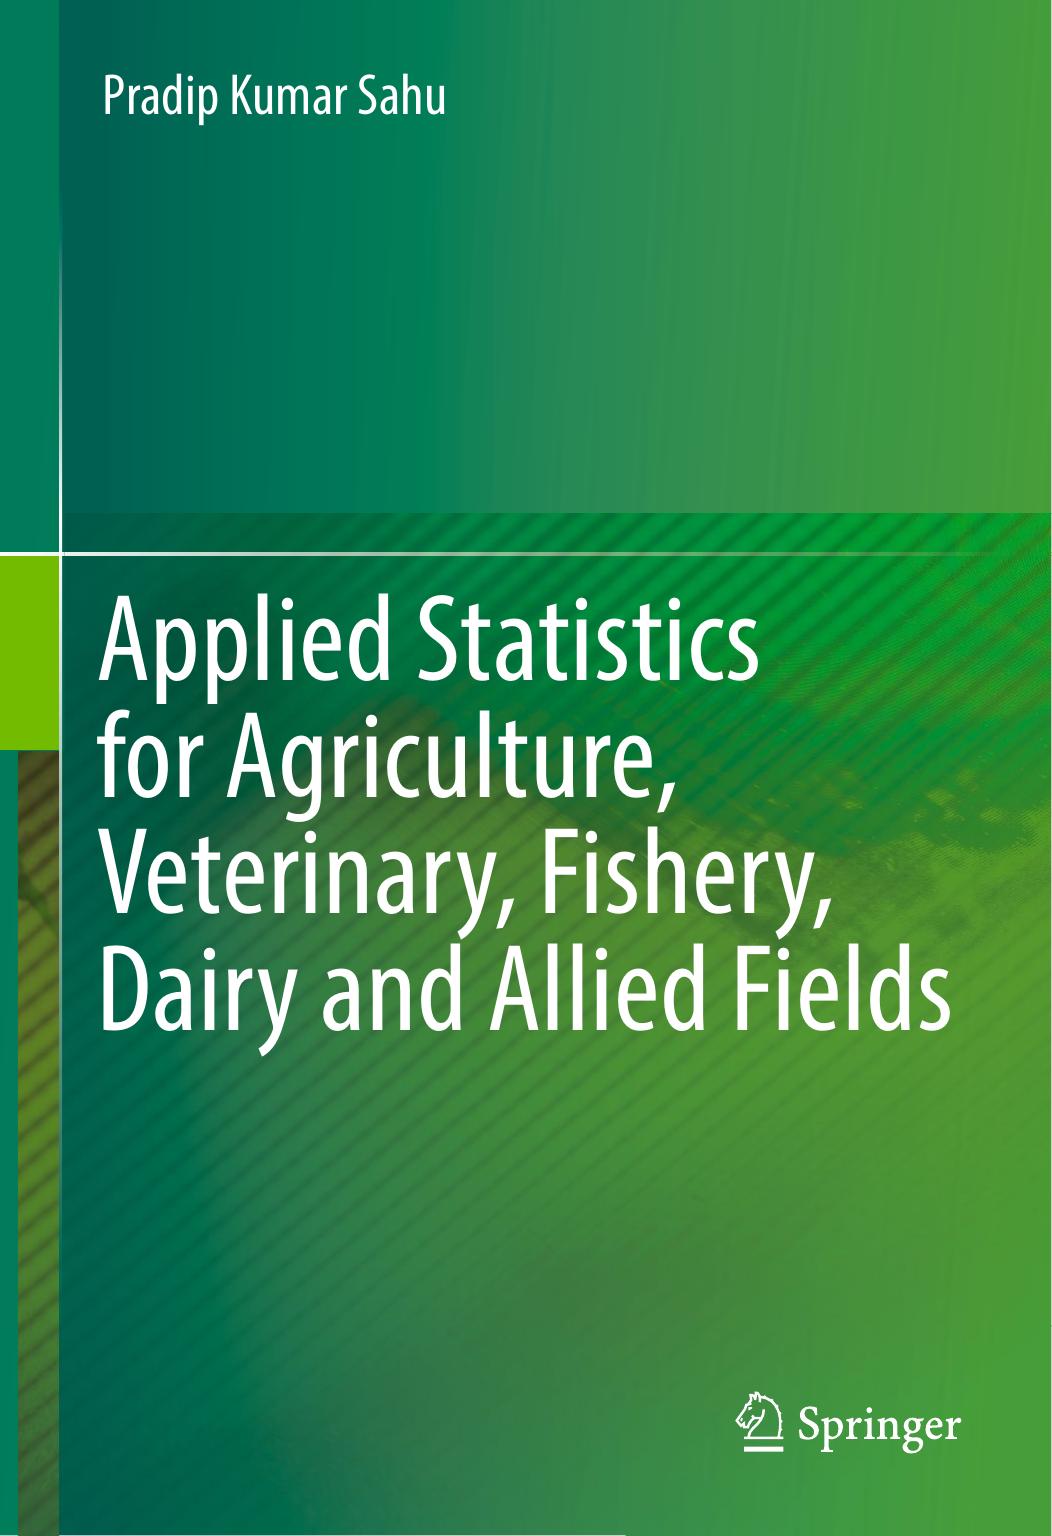 Applied Statistics for Agriculture, Veterinary, Fishery, Dairy and Allied Fields 2016